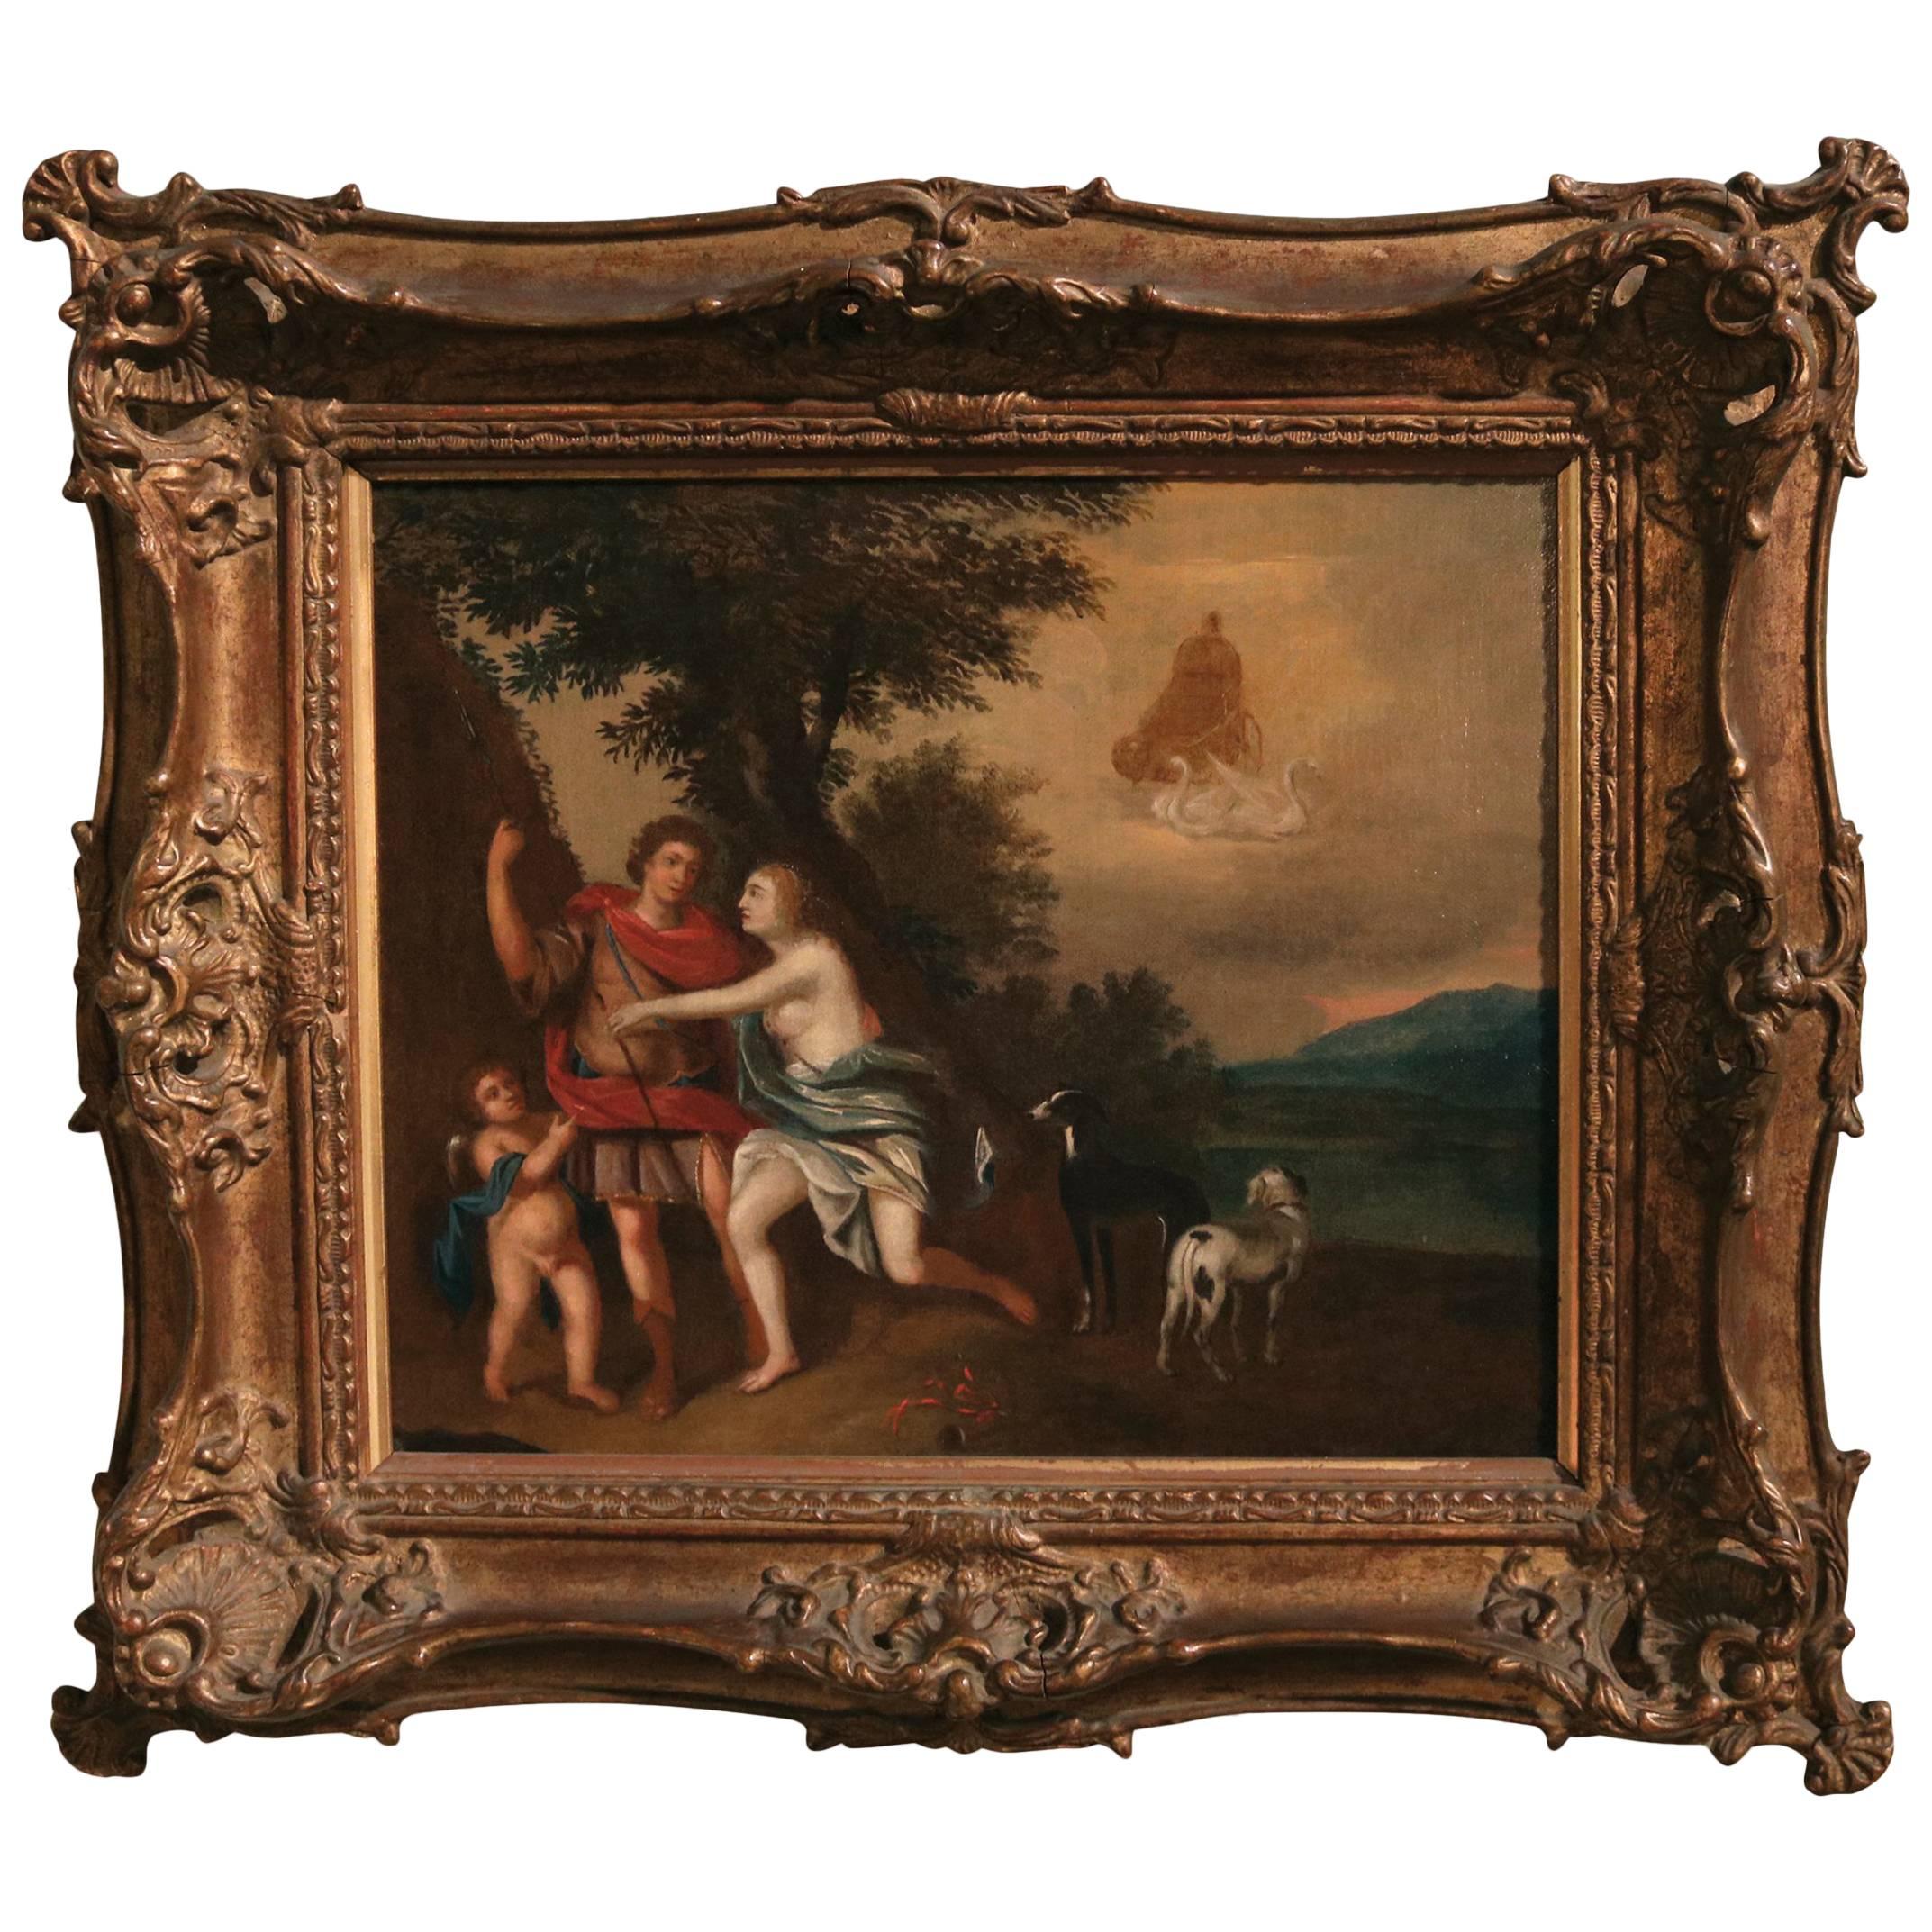 18th Century oil painting from the Sschool of Jan van Neck